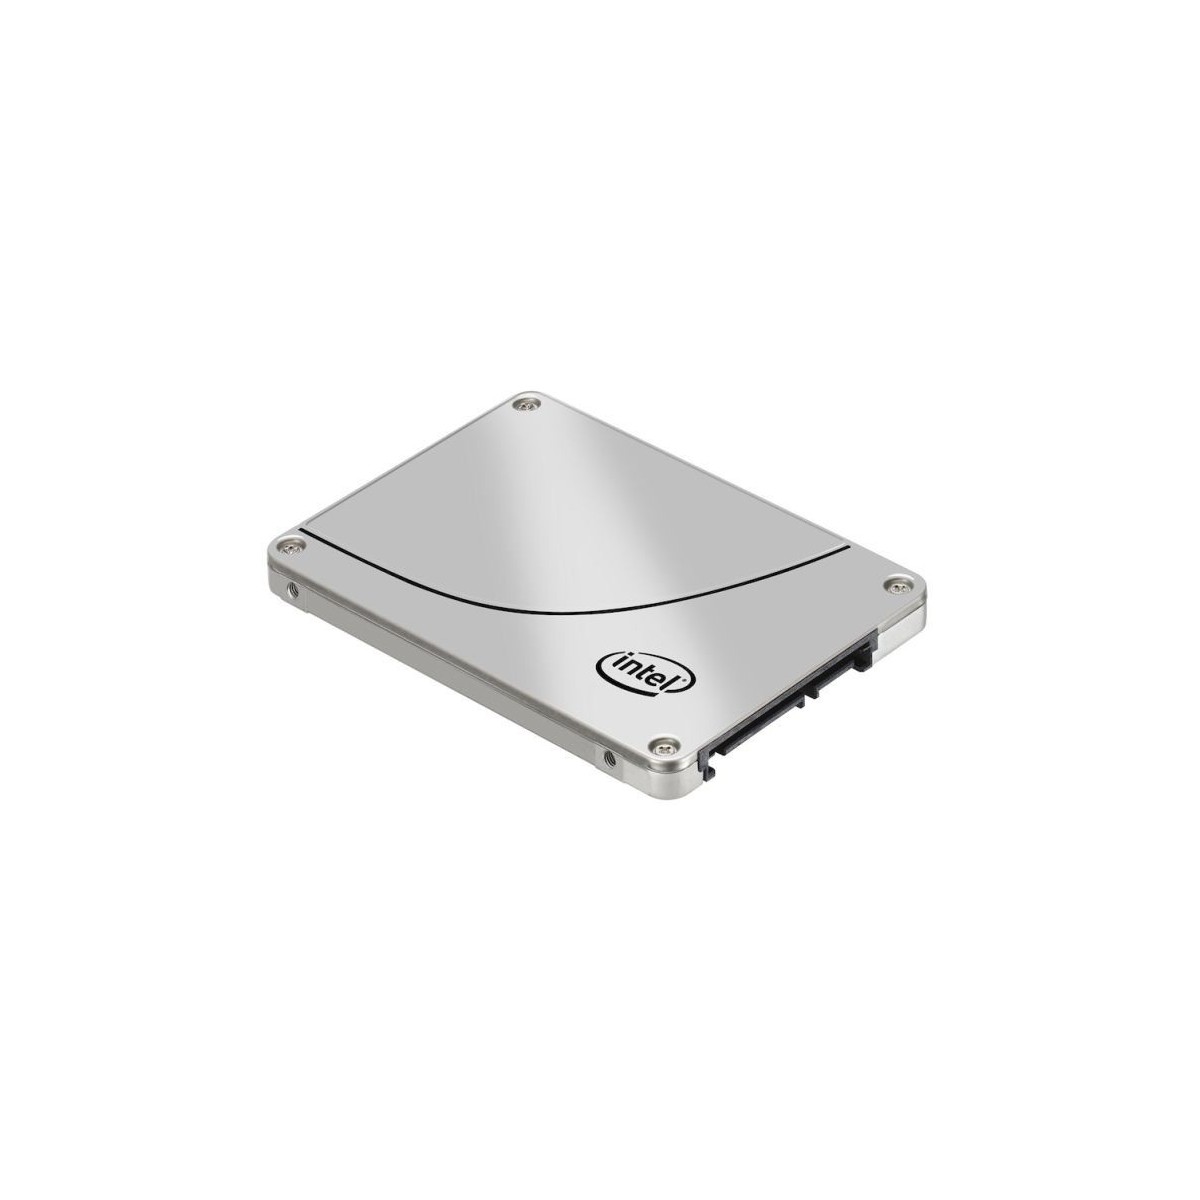 Intel Solid-State Drive DC S3510 Series 2.5 SATA 800 GB - Solid State Disk - Internal